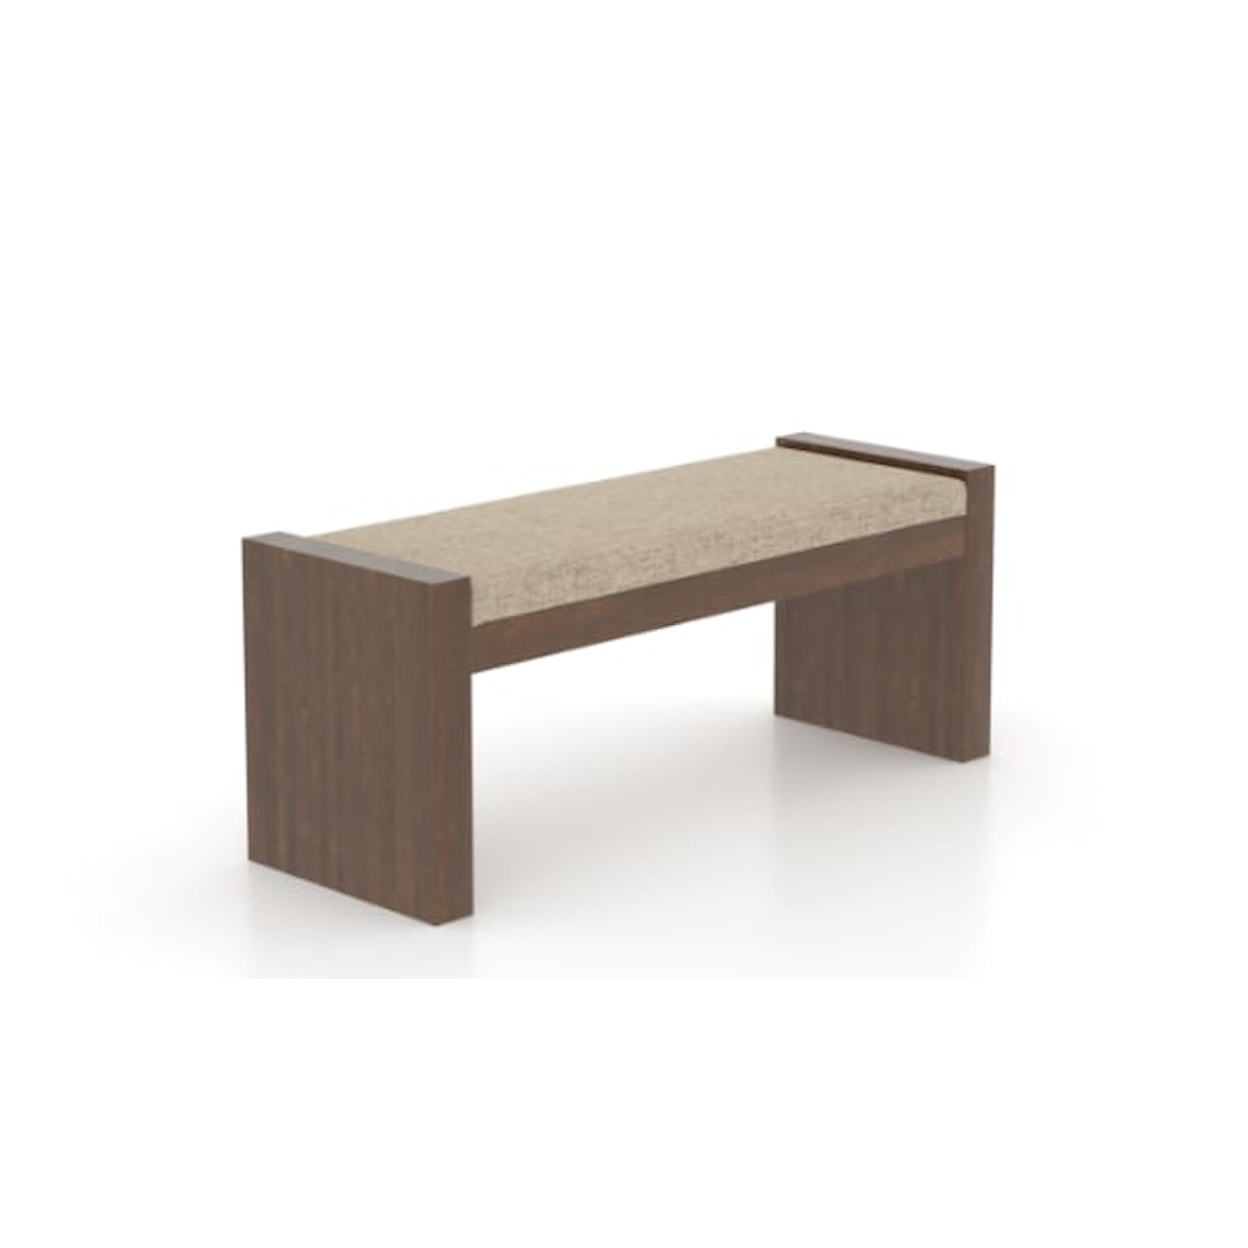 Canadel Canadel Upholstered Bench